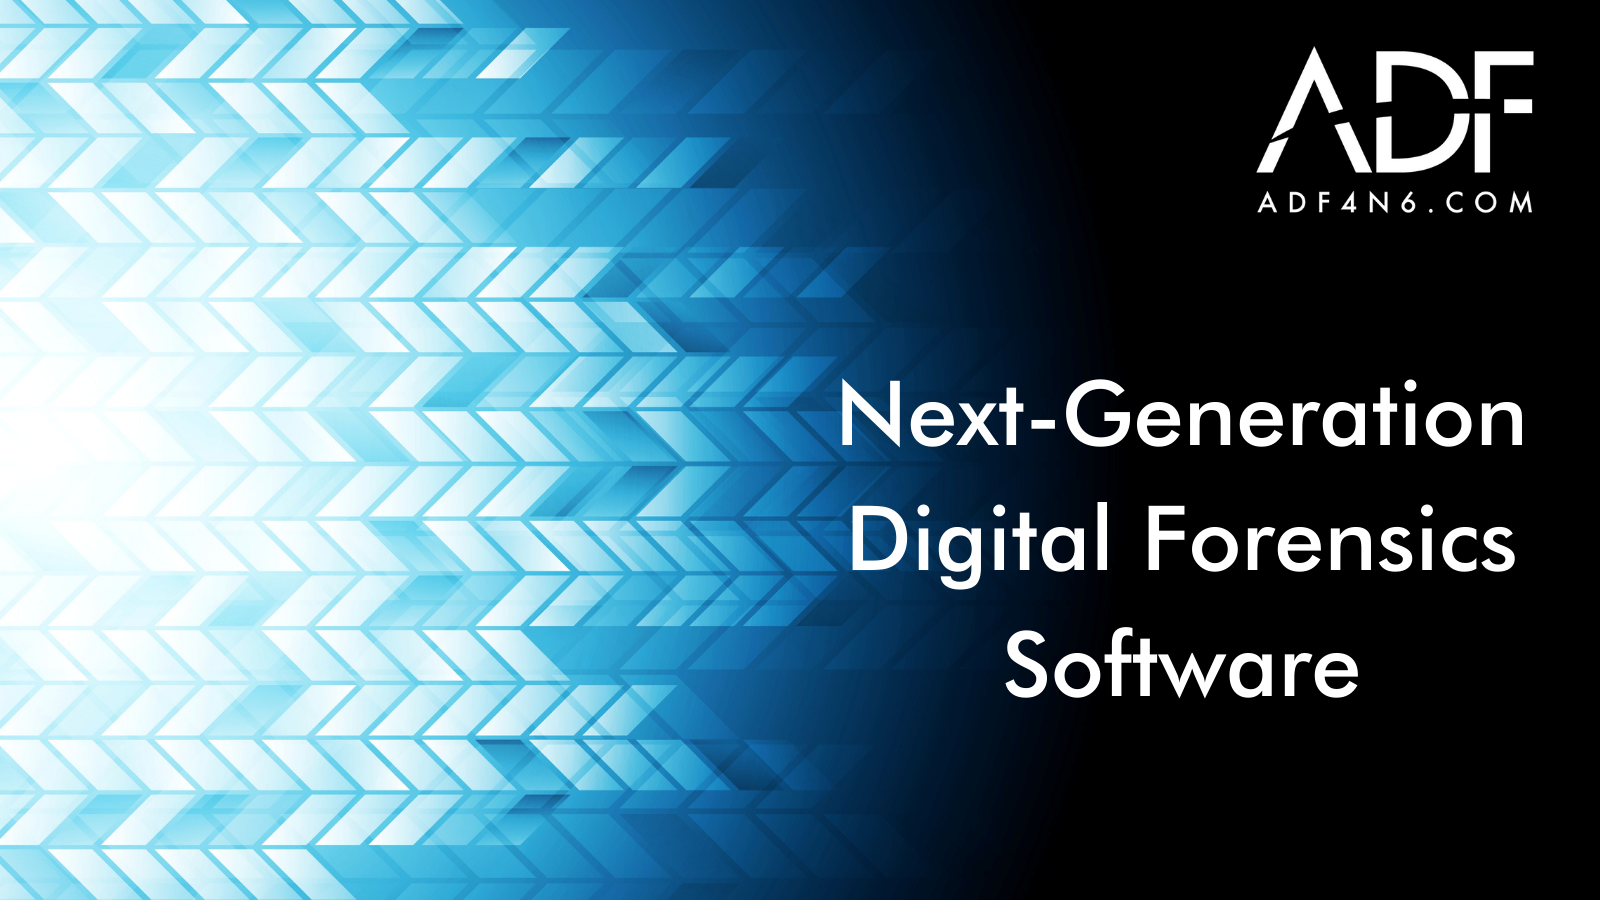 Next-Generation Digital Forensics: 5 Areas To Lead Your Department In